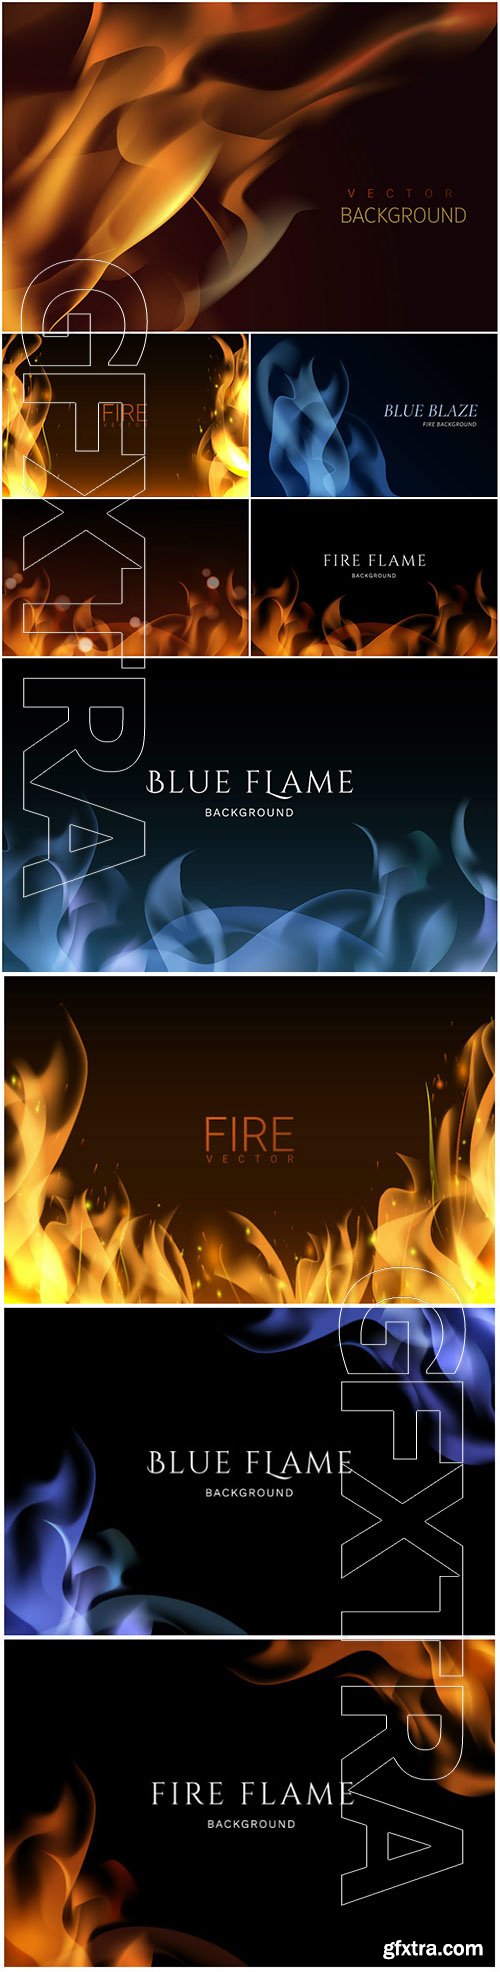 Burning flame vector background